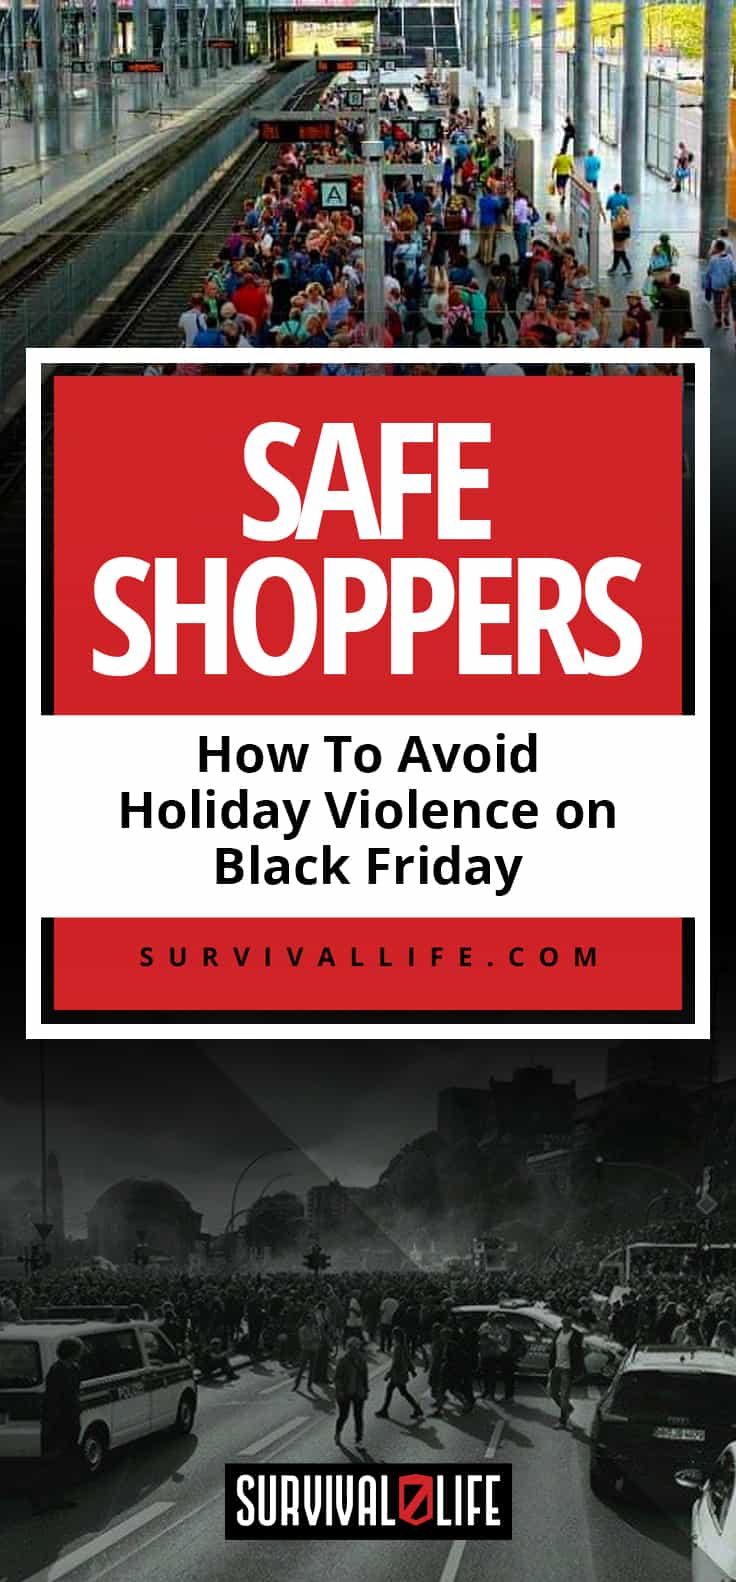 Safe Shoppers | How To Avoid Holiday Violence on Black Friday